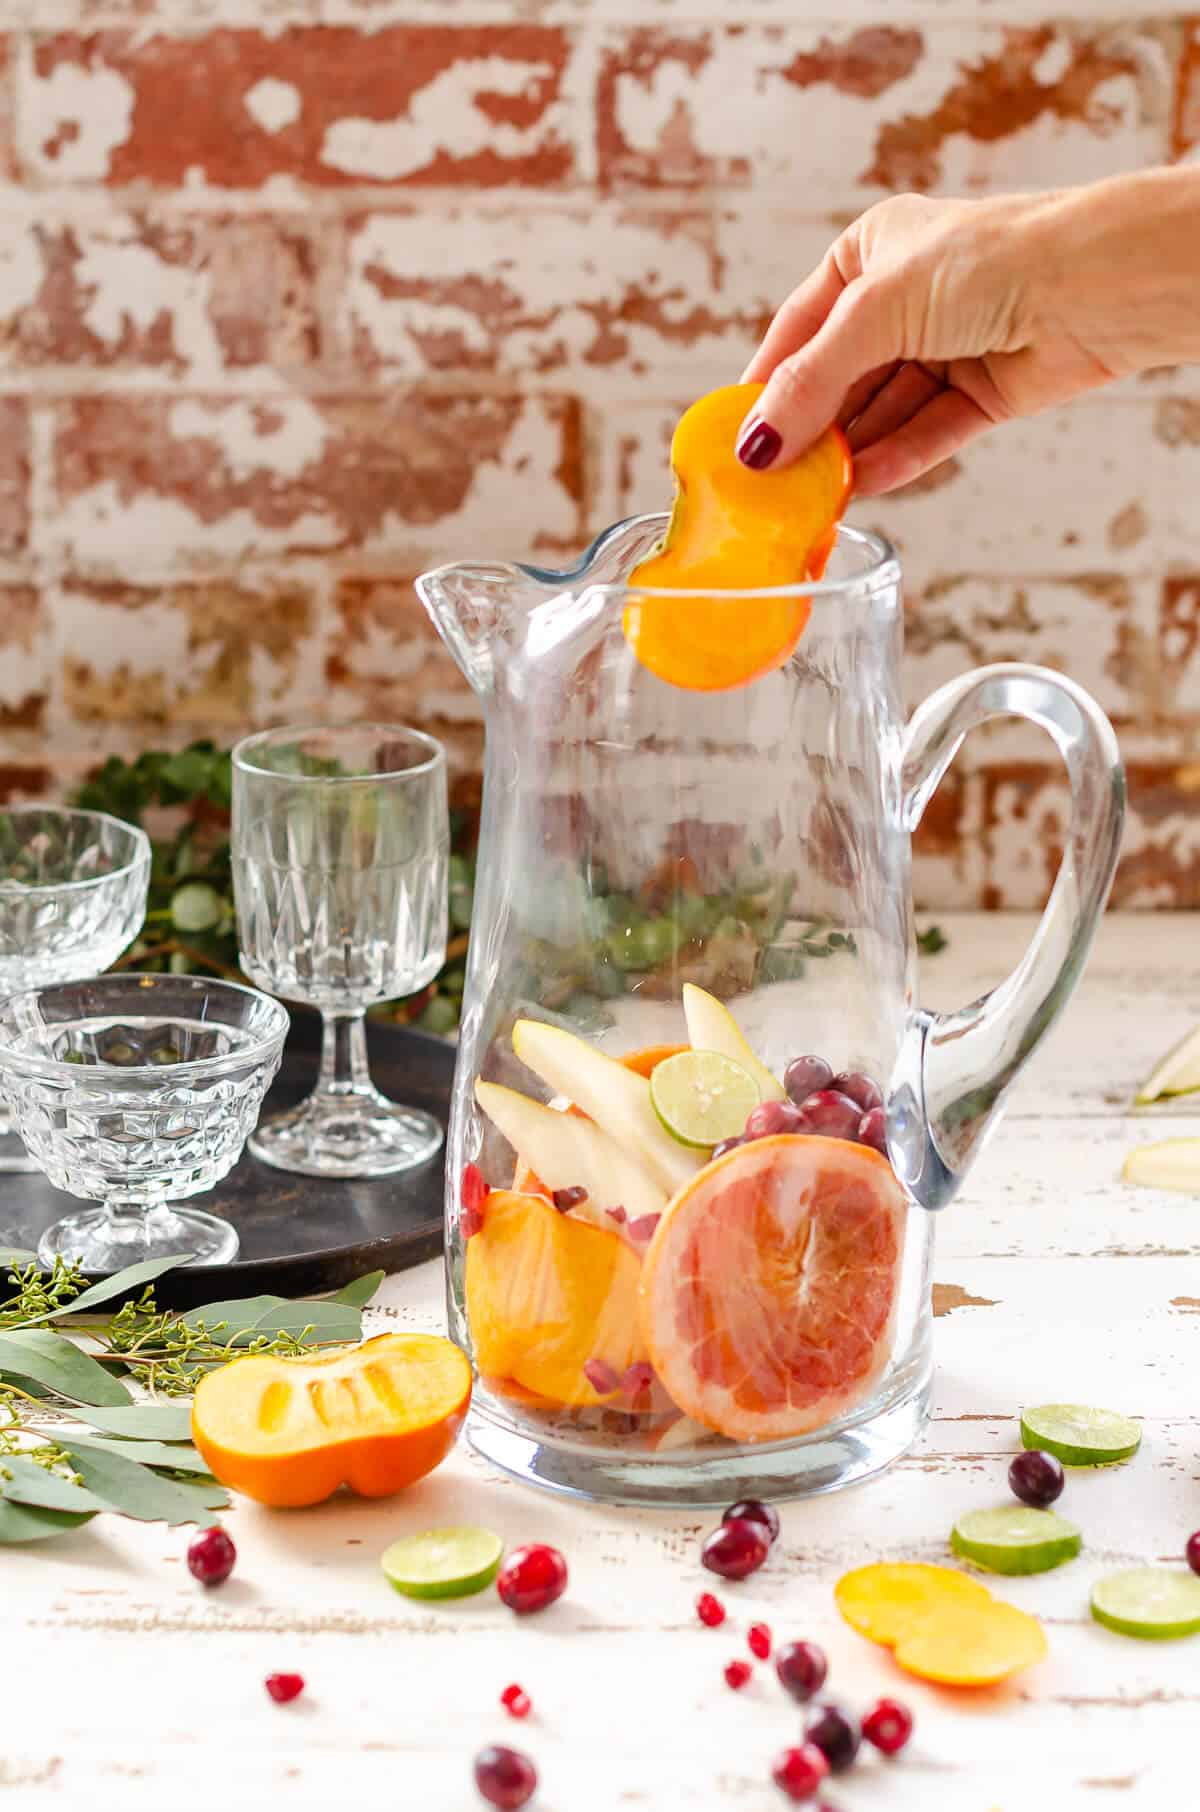 hand adding a slice of persimmon to a clear glass pitcher filled with fresh grapefruit, pears and cranberries for a Sangria Mocktail